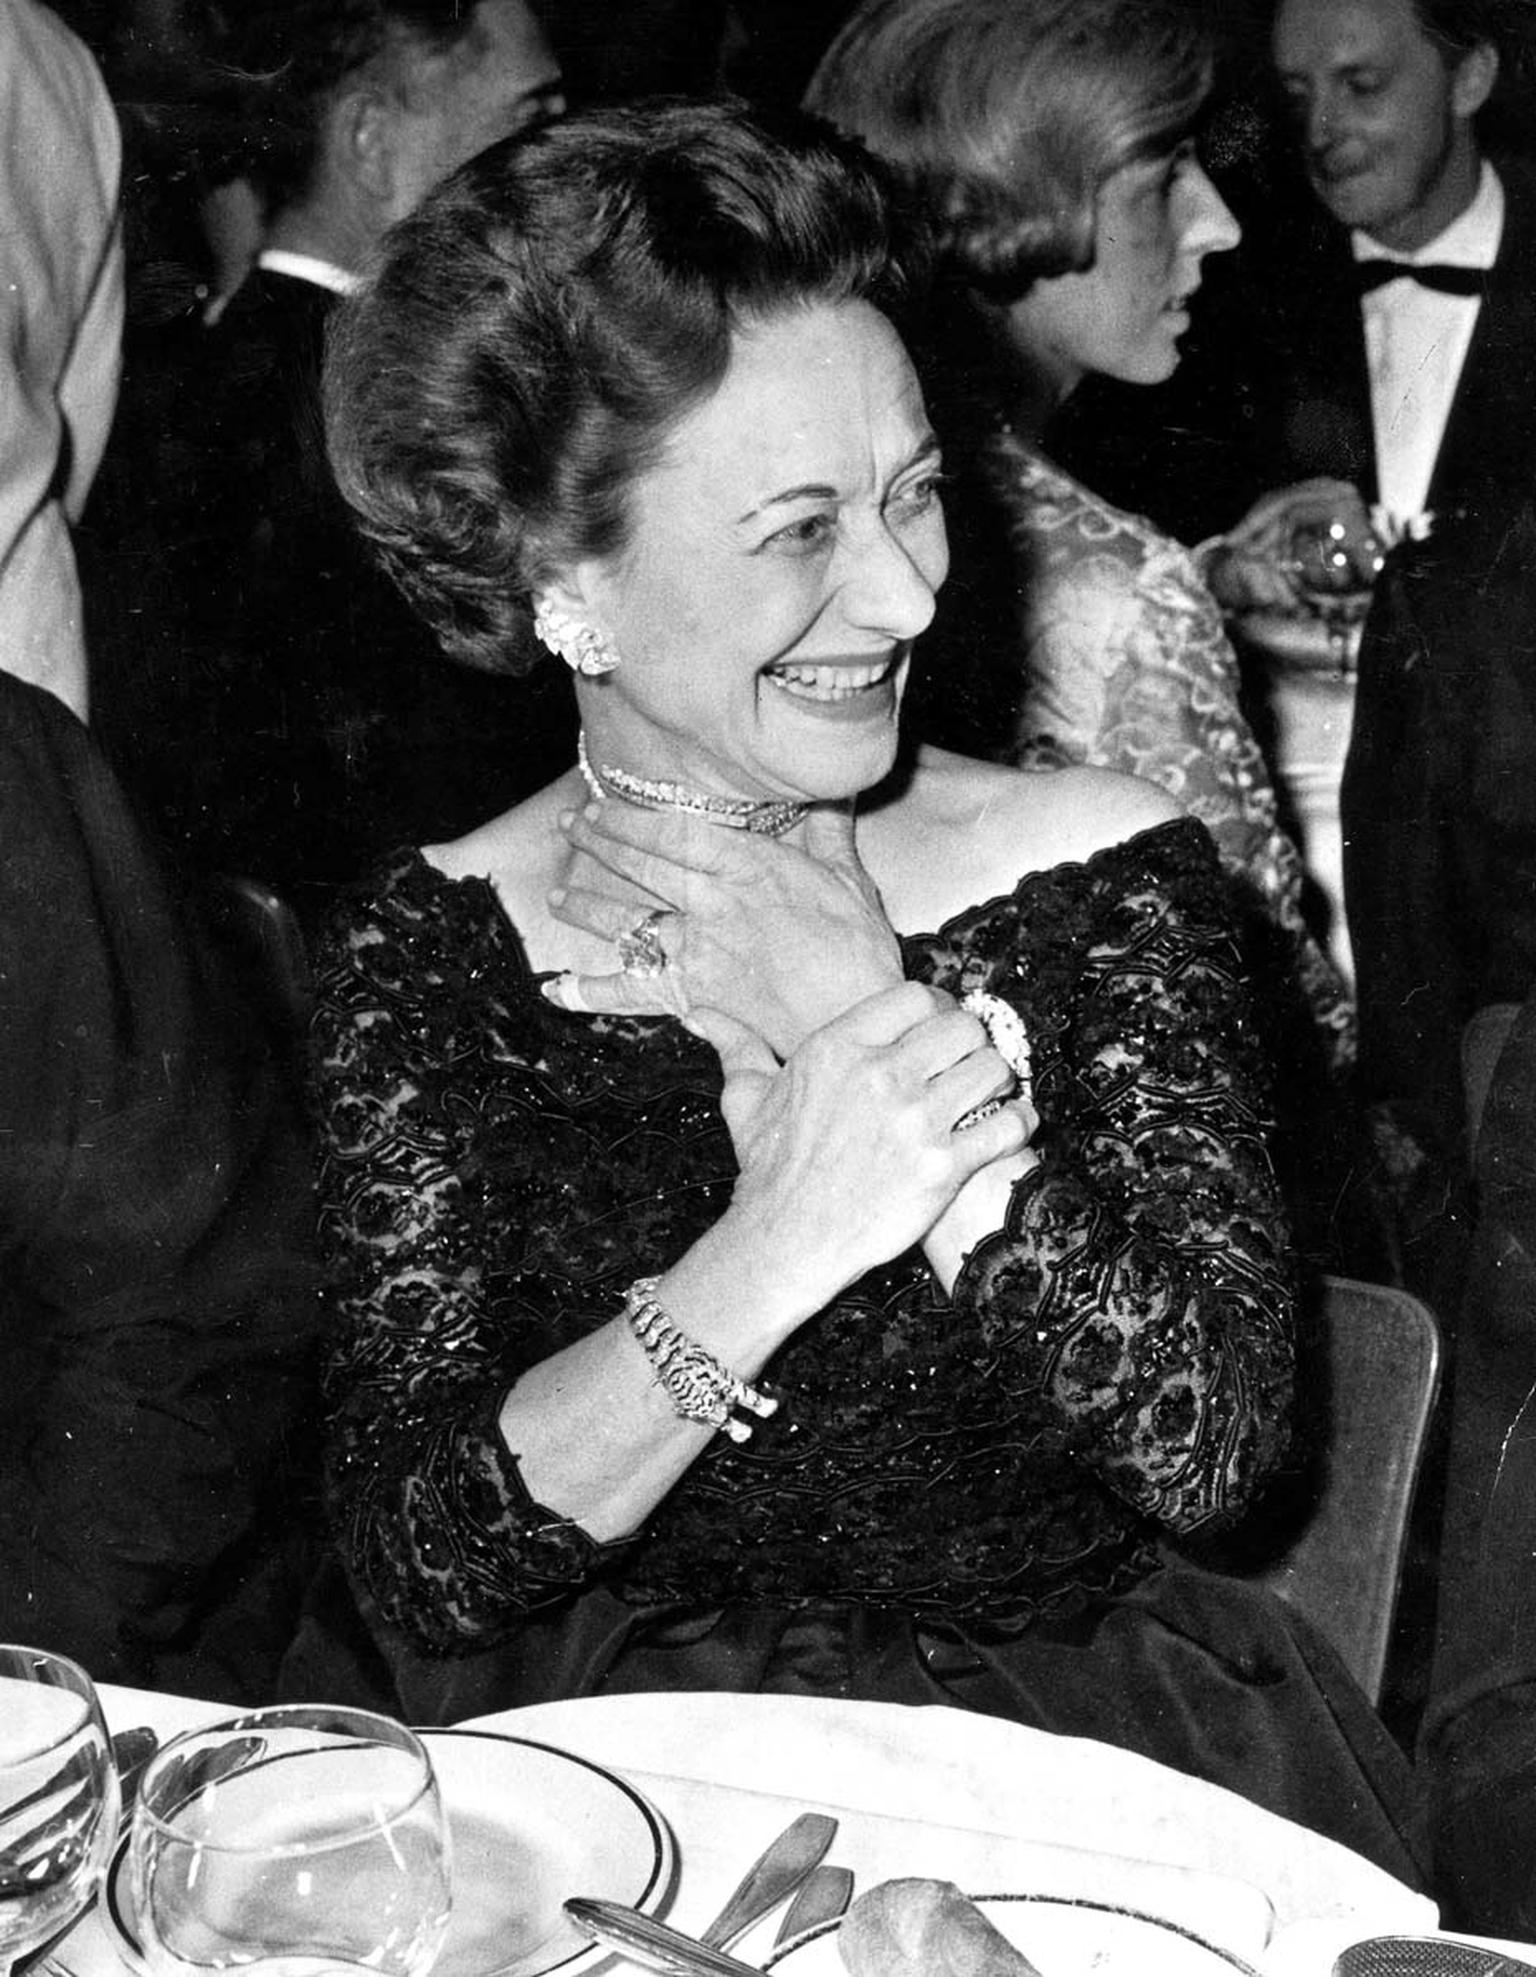 The Duchess of Windsor wearing the Cartier Tiger bracelet during the 1959 Gala opening of the new Lido Revue in Paris. ©Getty Images/Popperfoto.